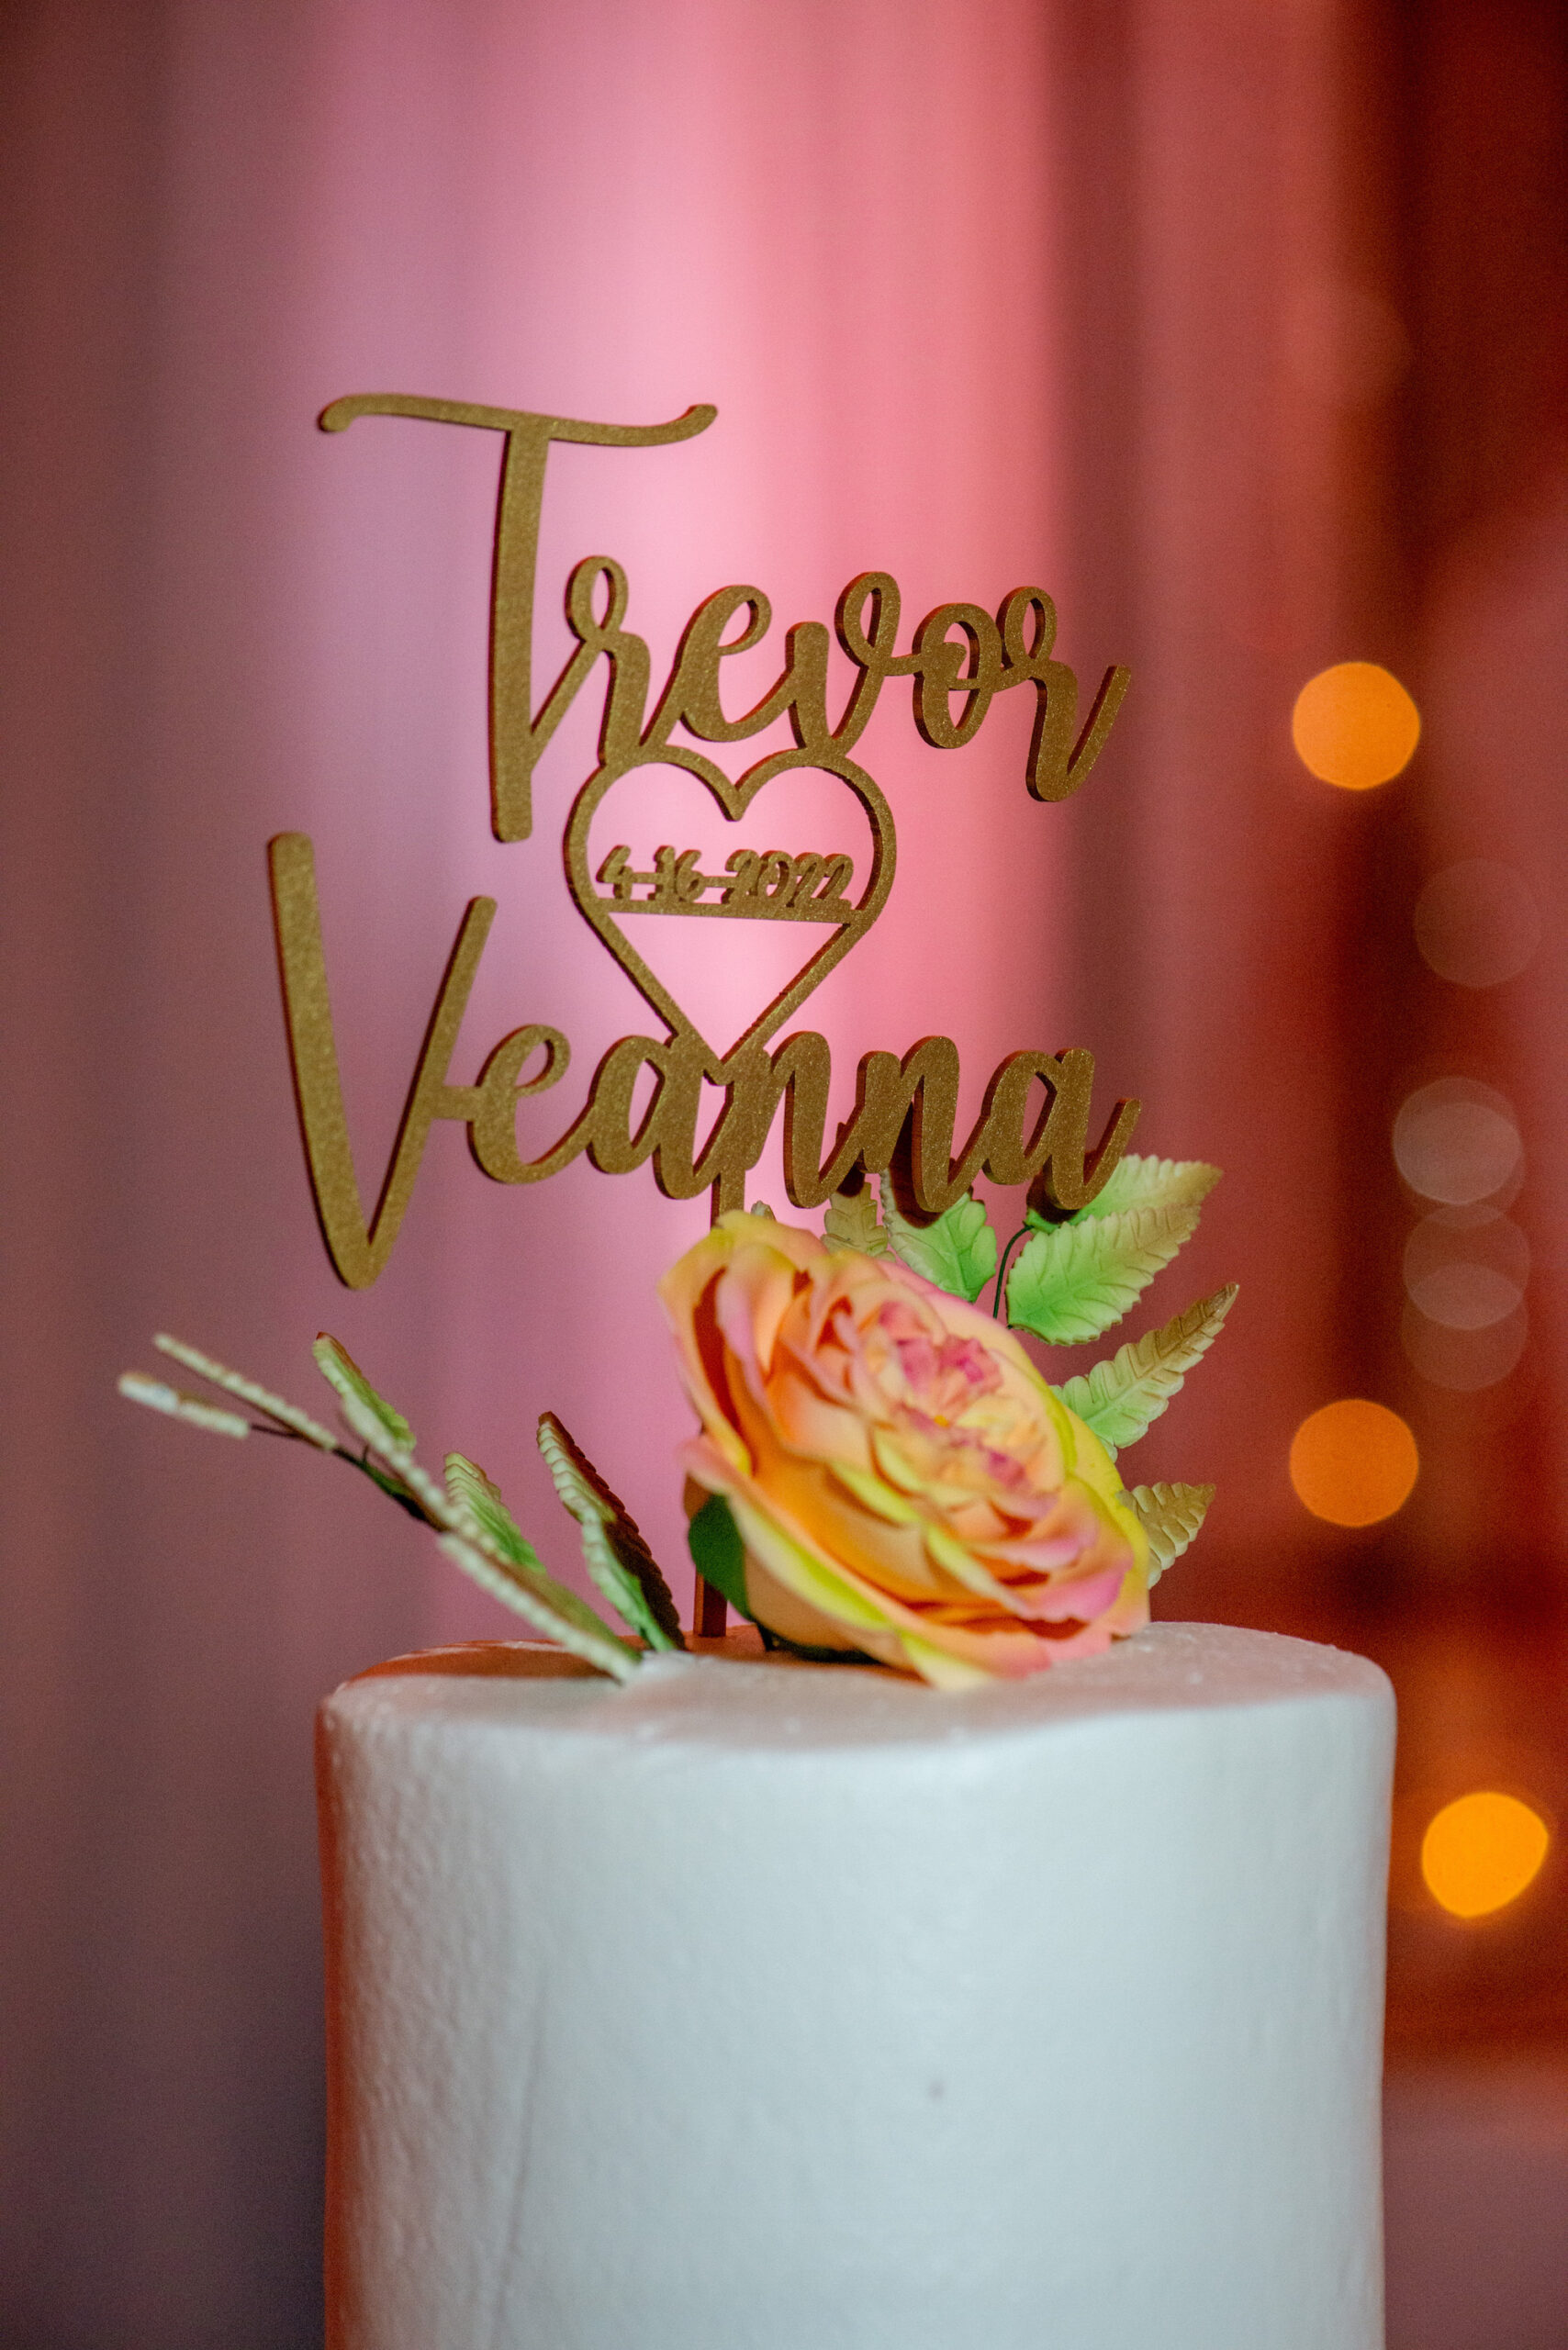 Elegant Engraved Cake Topper with Trevor and Veanna, and April 16 2022